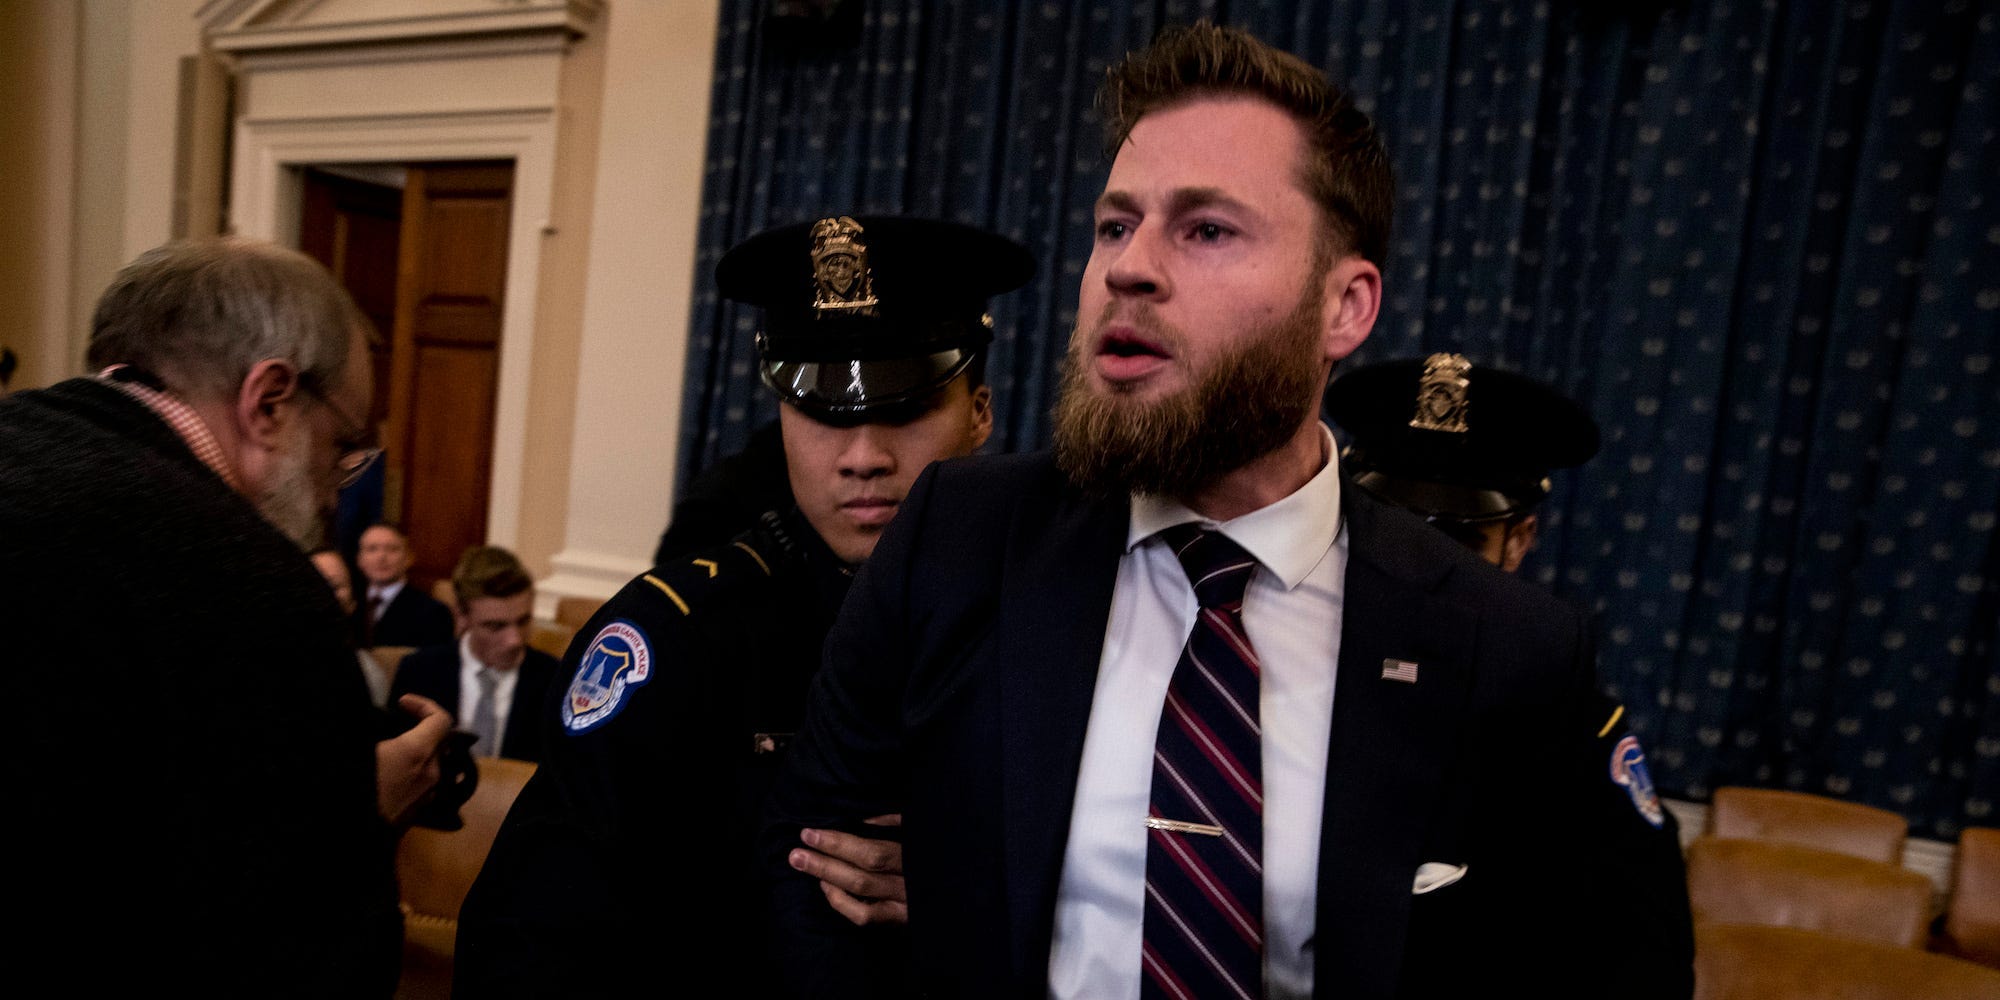 Owen Shroyer from InfoWars is removed from a public impeachment inquiry hearing with the House Judiciary Committee in the Longworth House Office Building on Capitol Hill December 9, 2019 in Washington, DC.